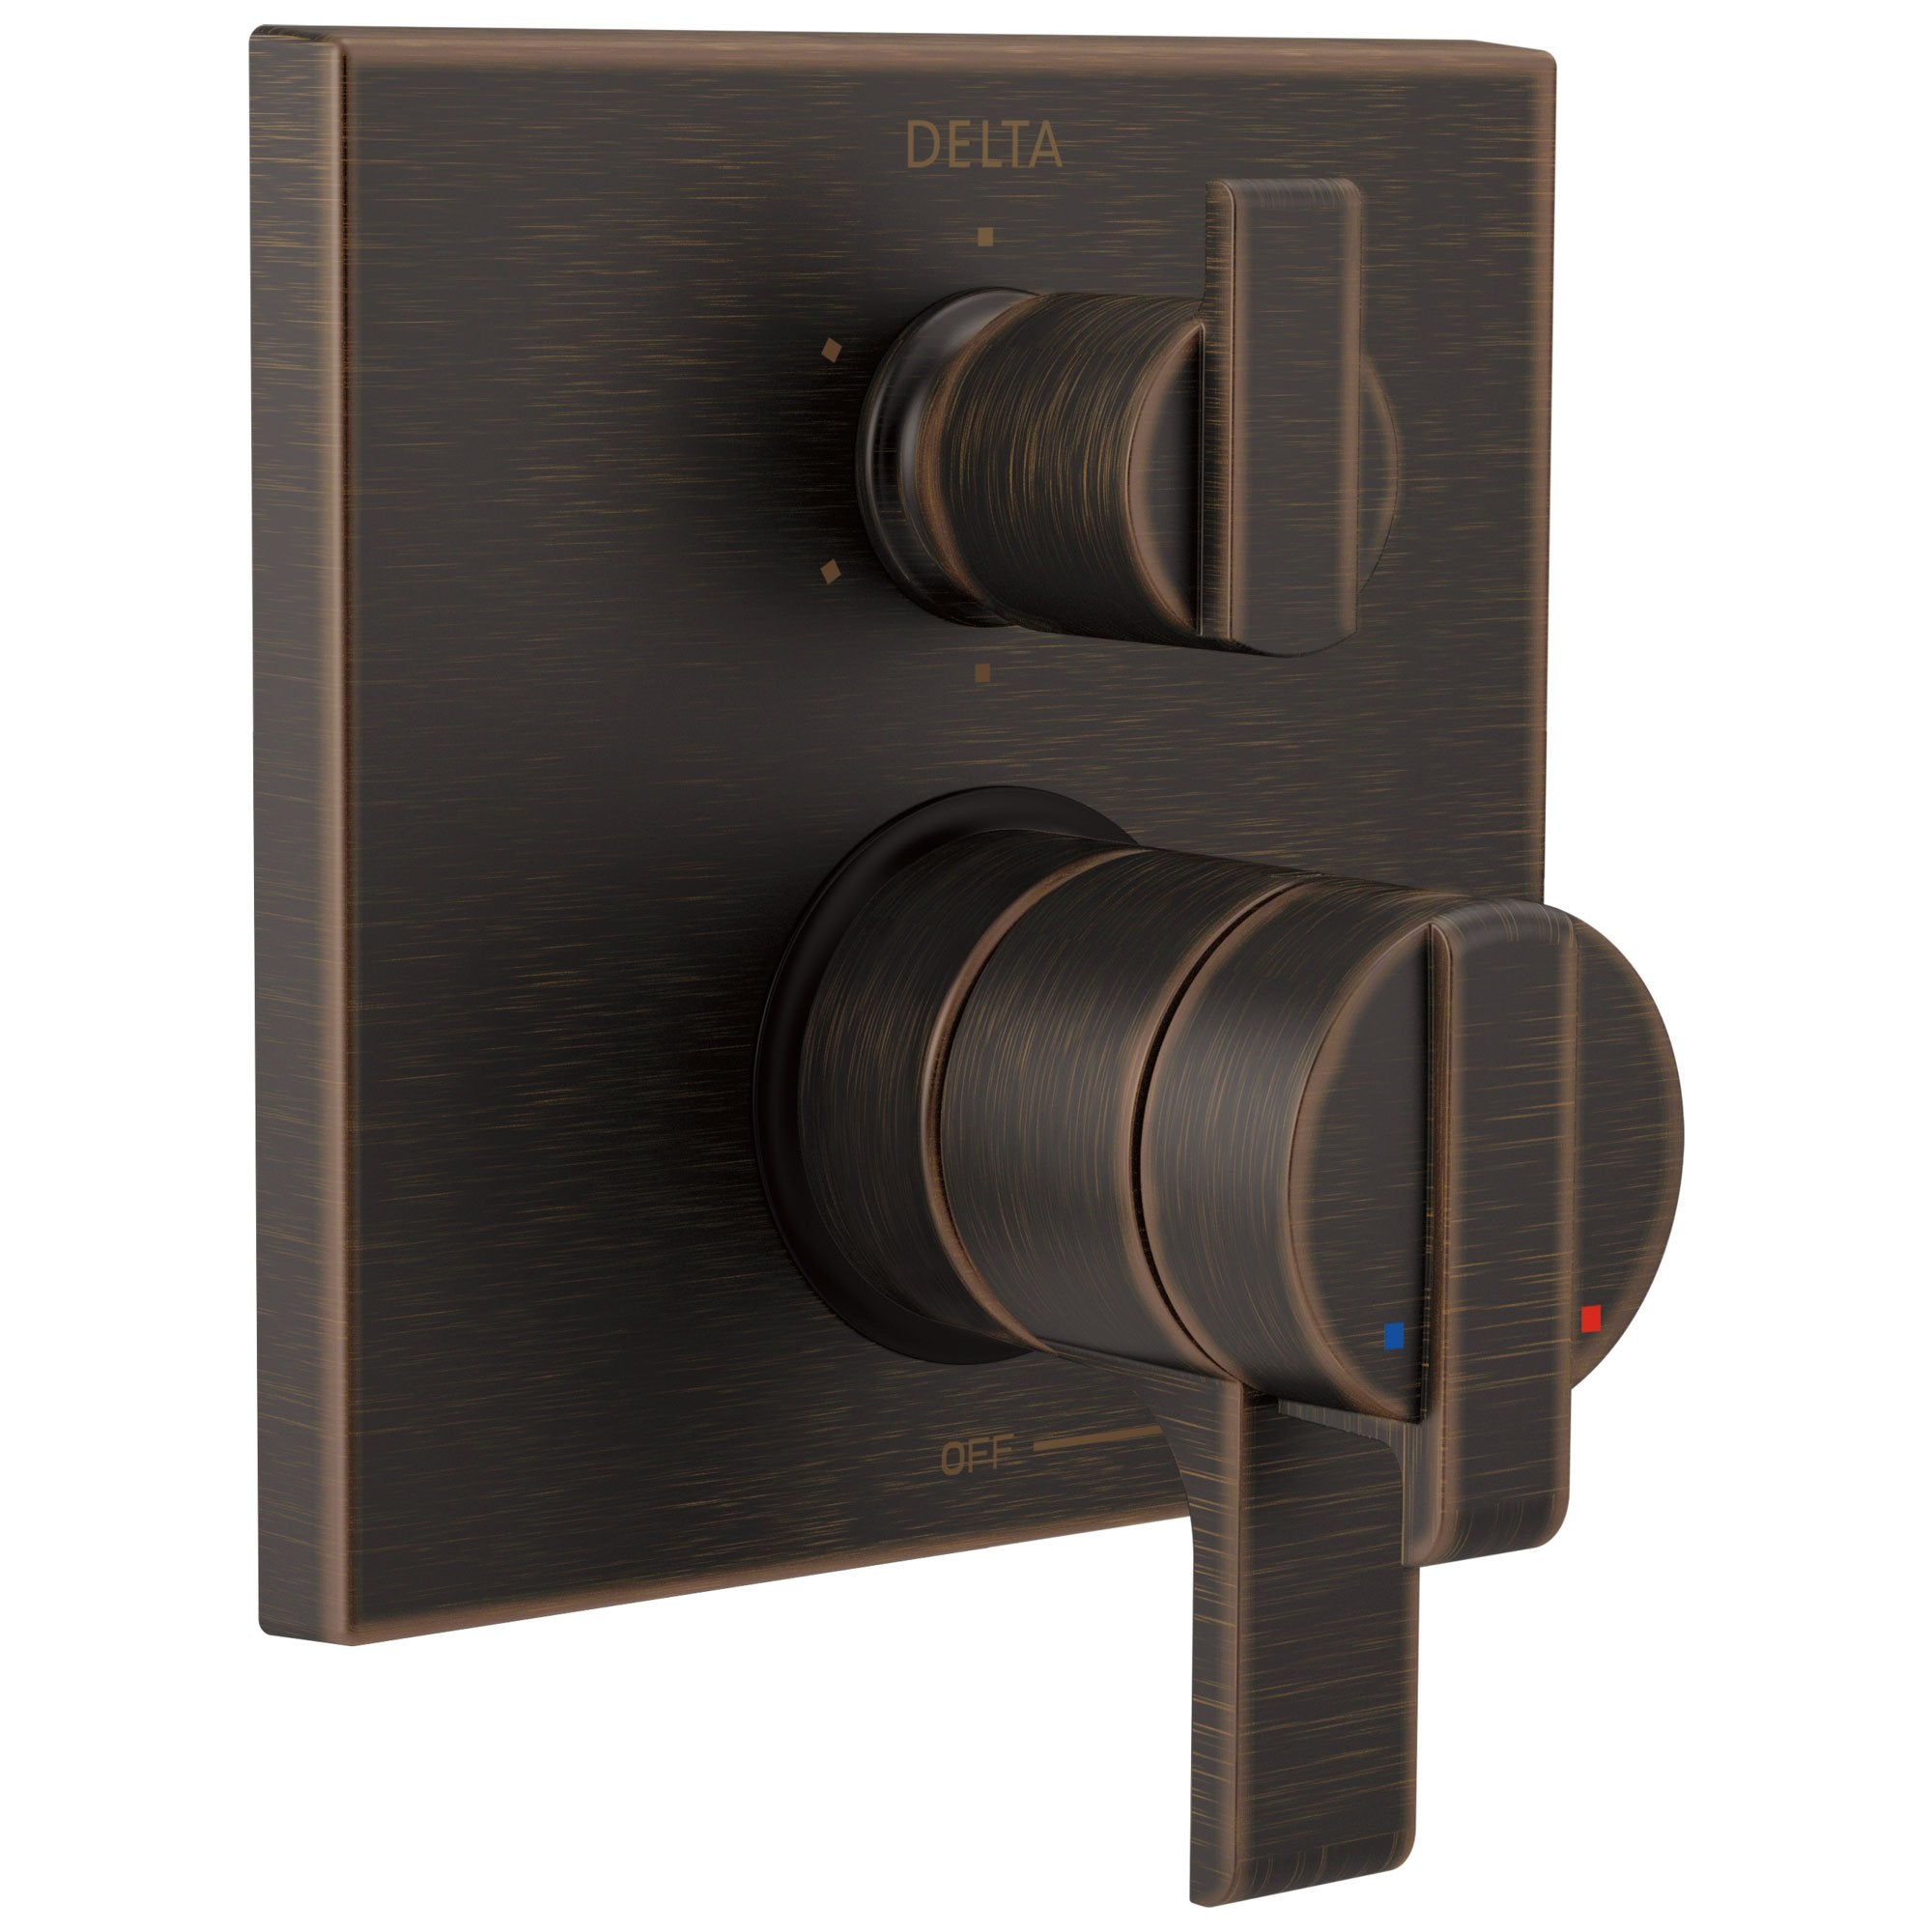 Delta Ara Venetian Bronze Modern Monitor 17 Shower Faucet Control Handle with 6-Setting Integrated Diverter Includes Trim Kit and Valve with Stops D2151V